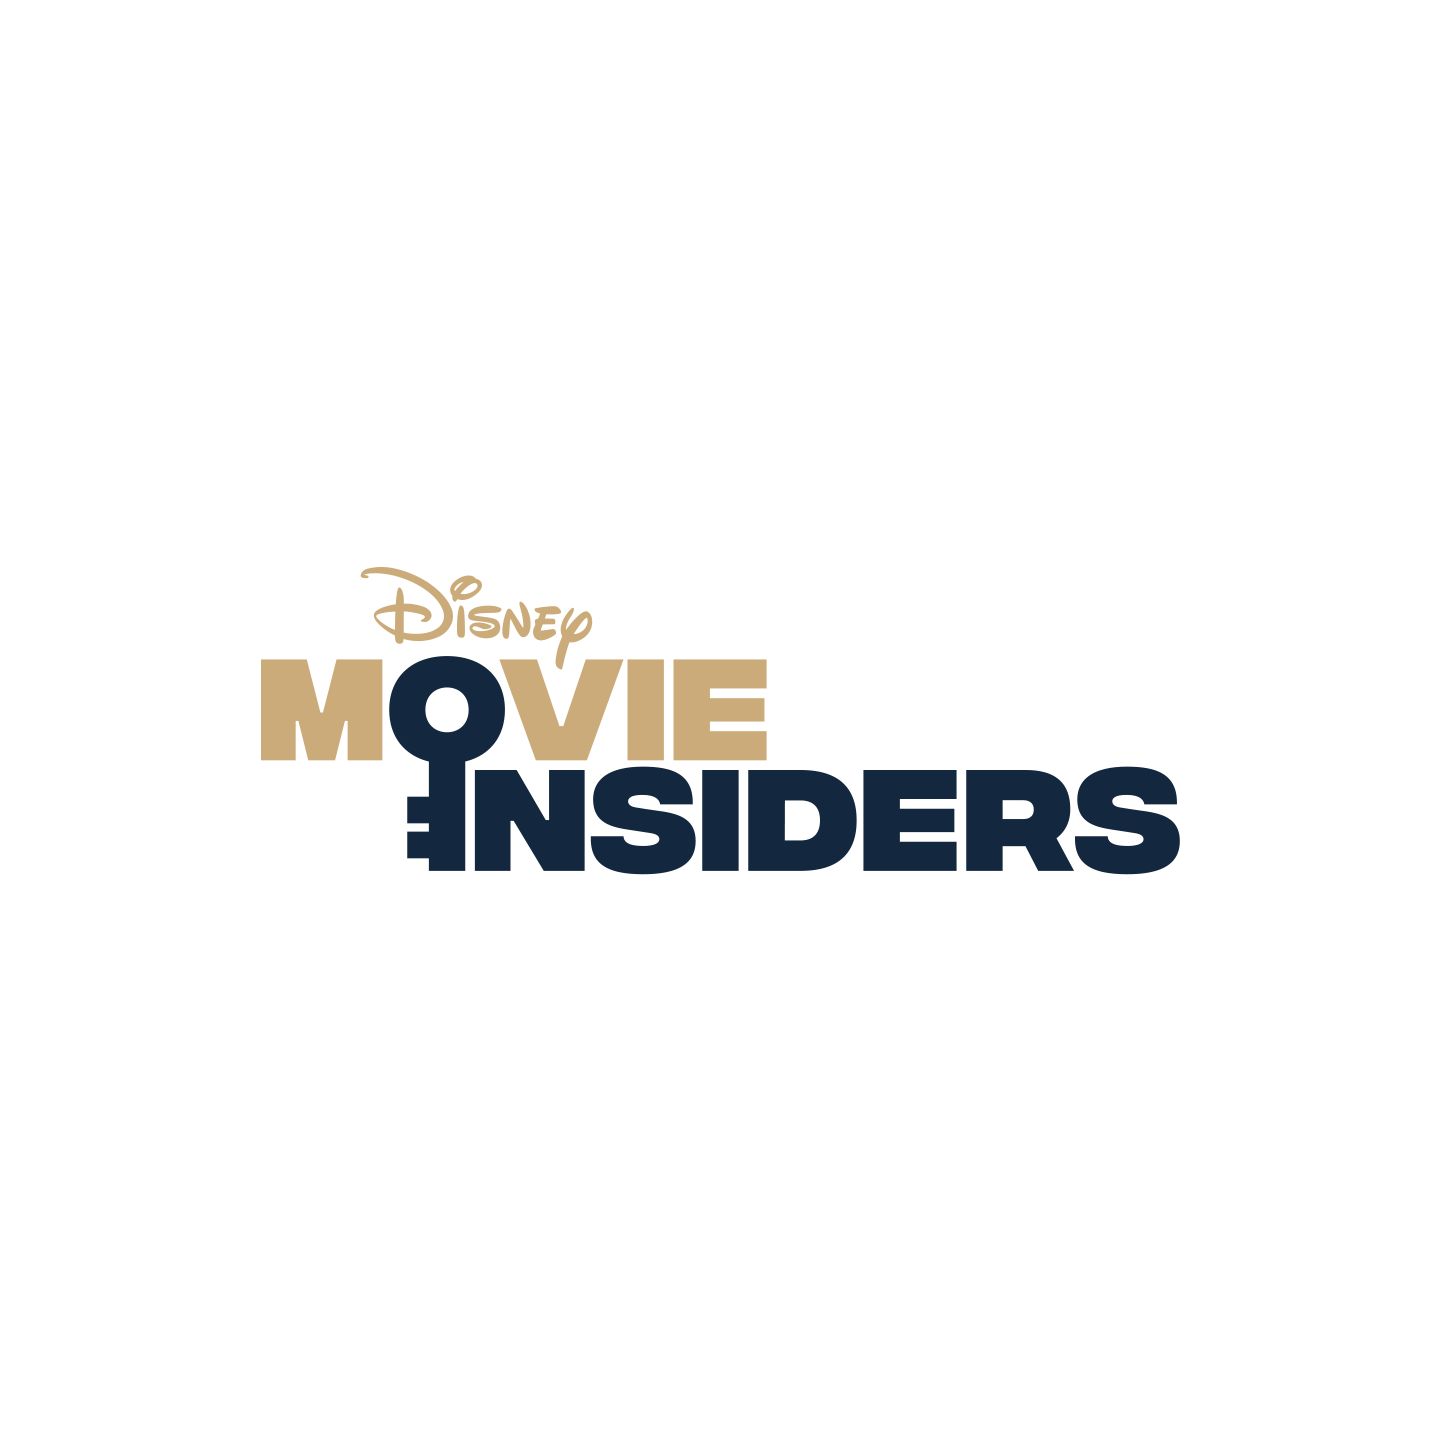 WHERE FANS BECOME INSIDERS | Welcome to Disney Movie Insiders where new fans unite! Unlock Insider access, perks and more! | LEARN MORE